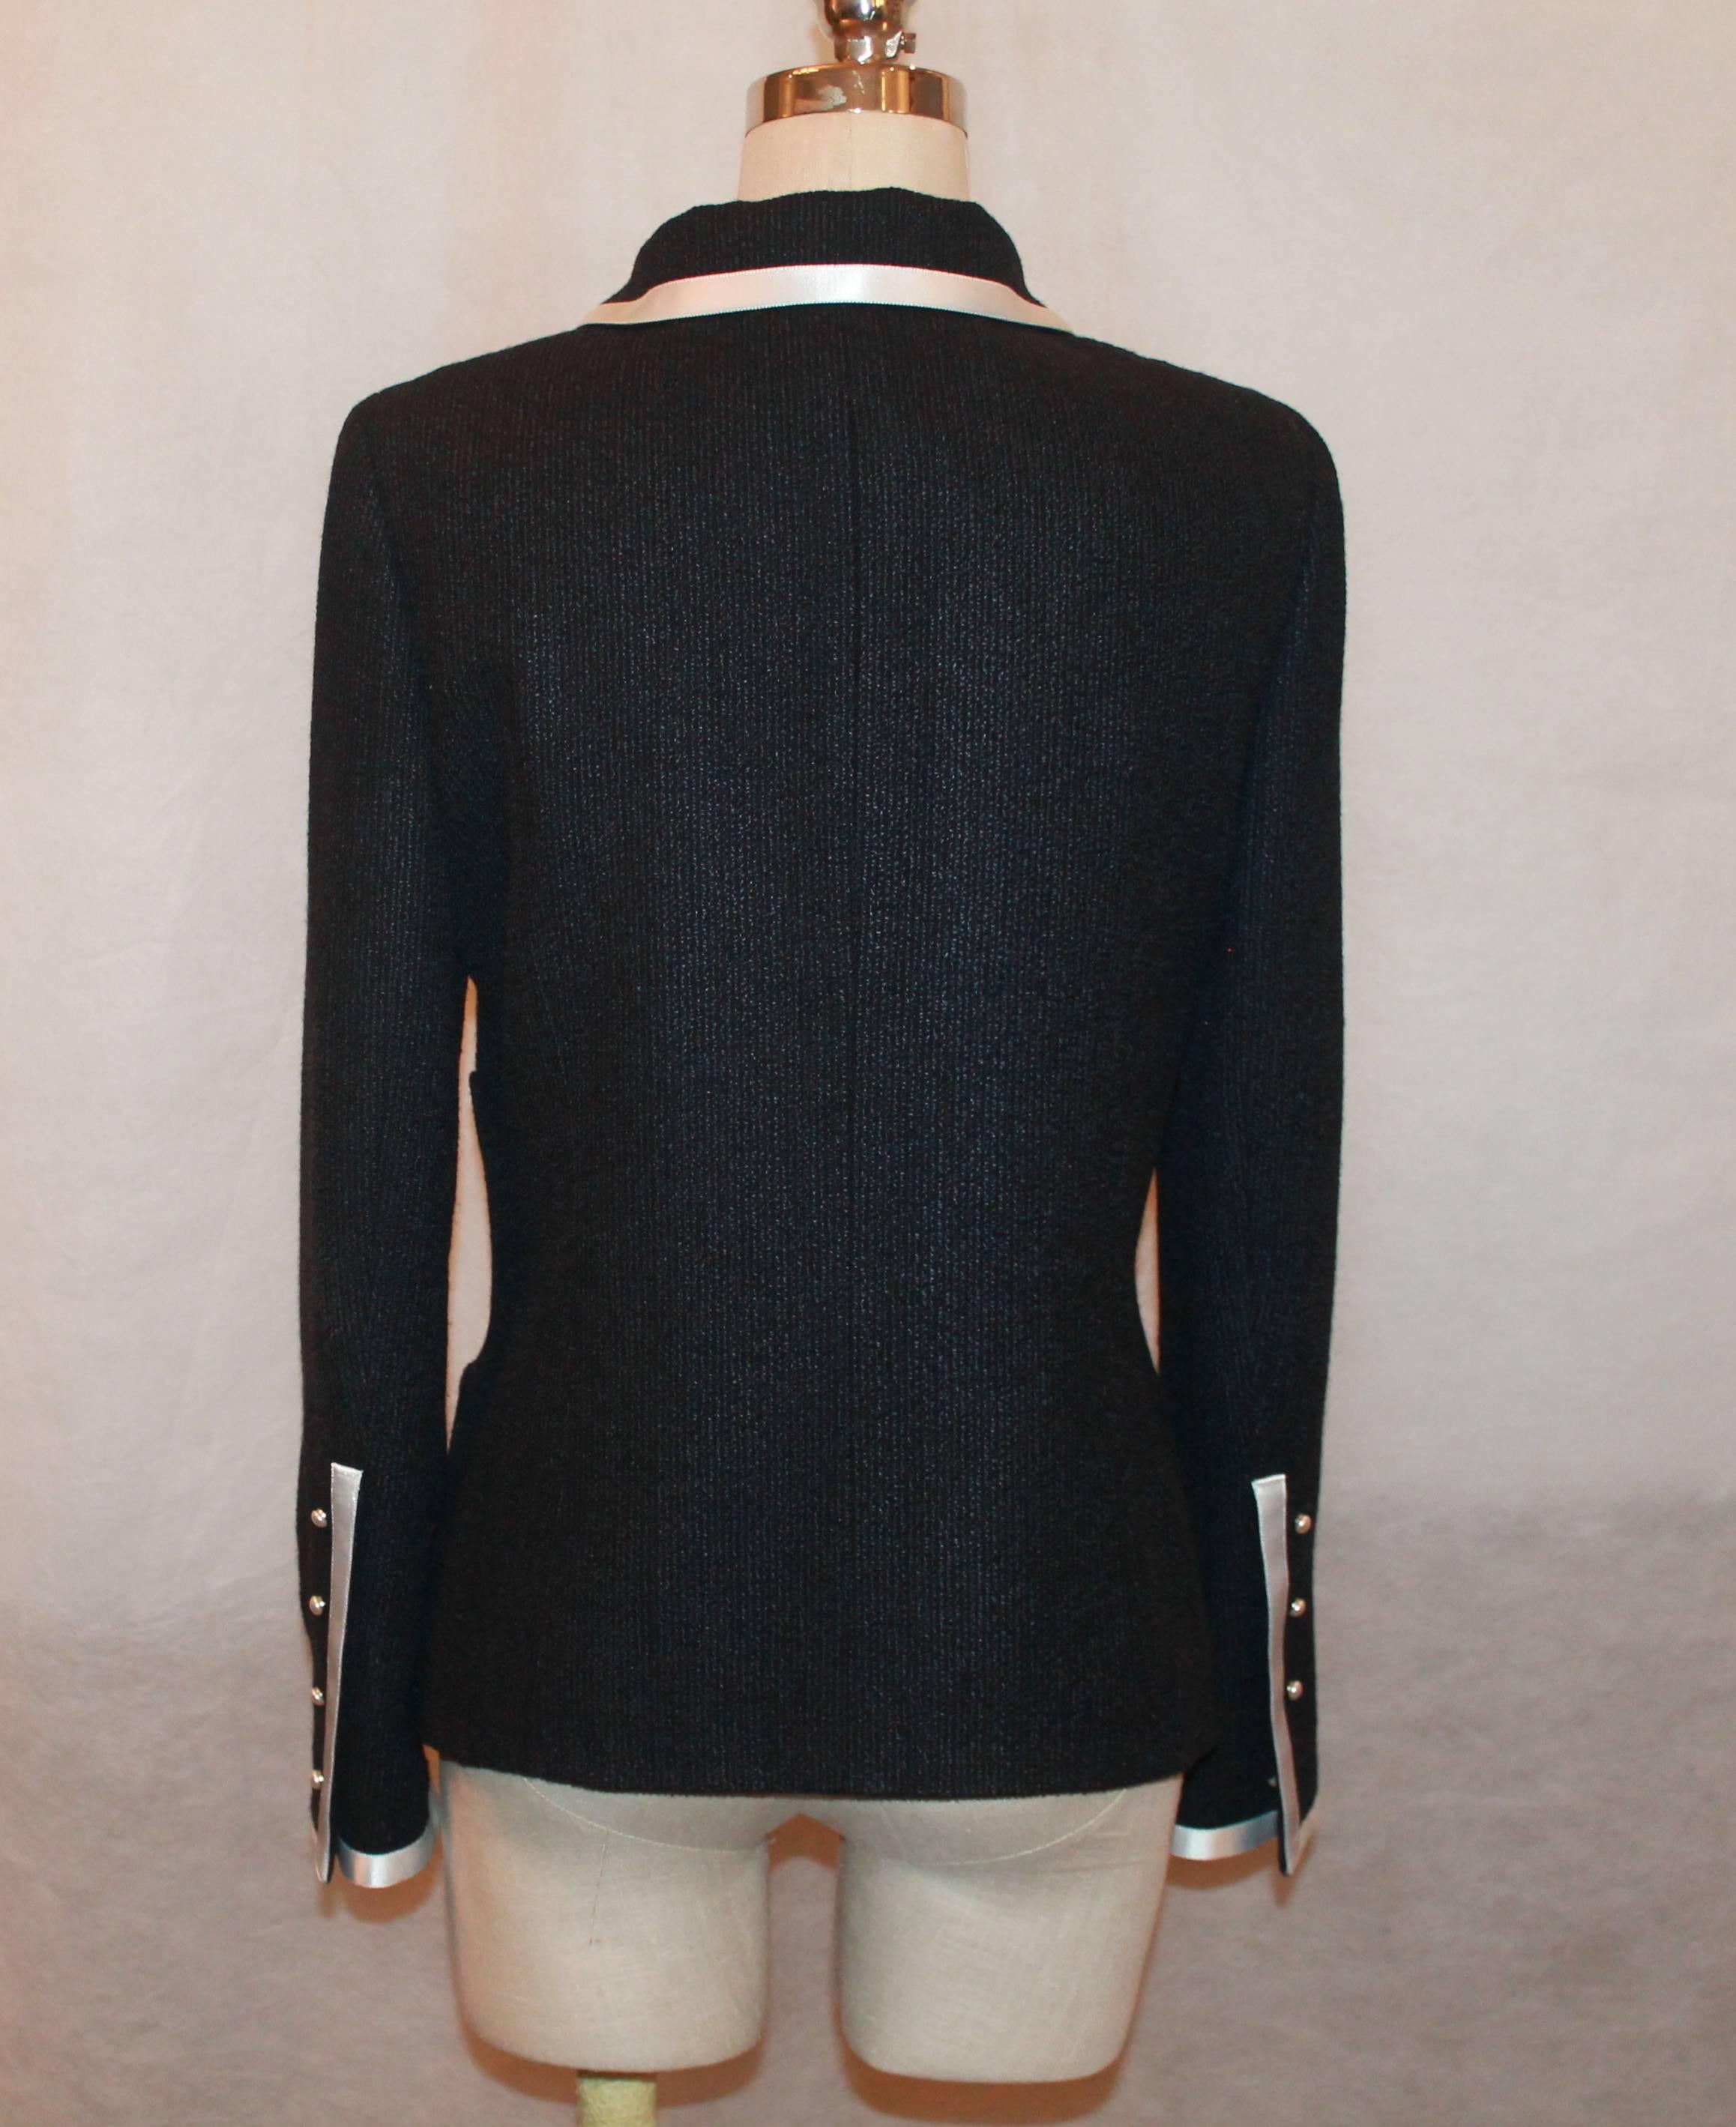 2004 Chanel Black 4-Pocket Jacket with White Ribbon Trim and Pearls - 40 2